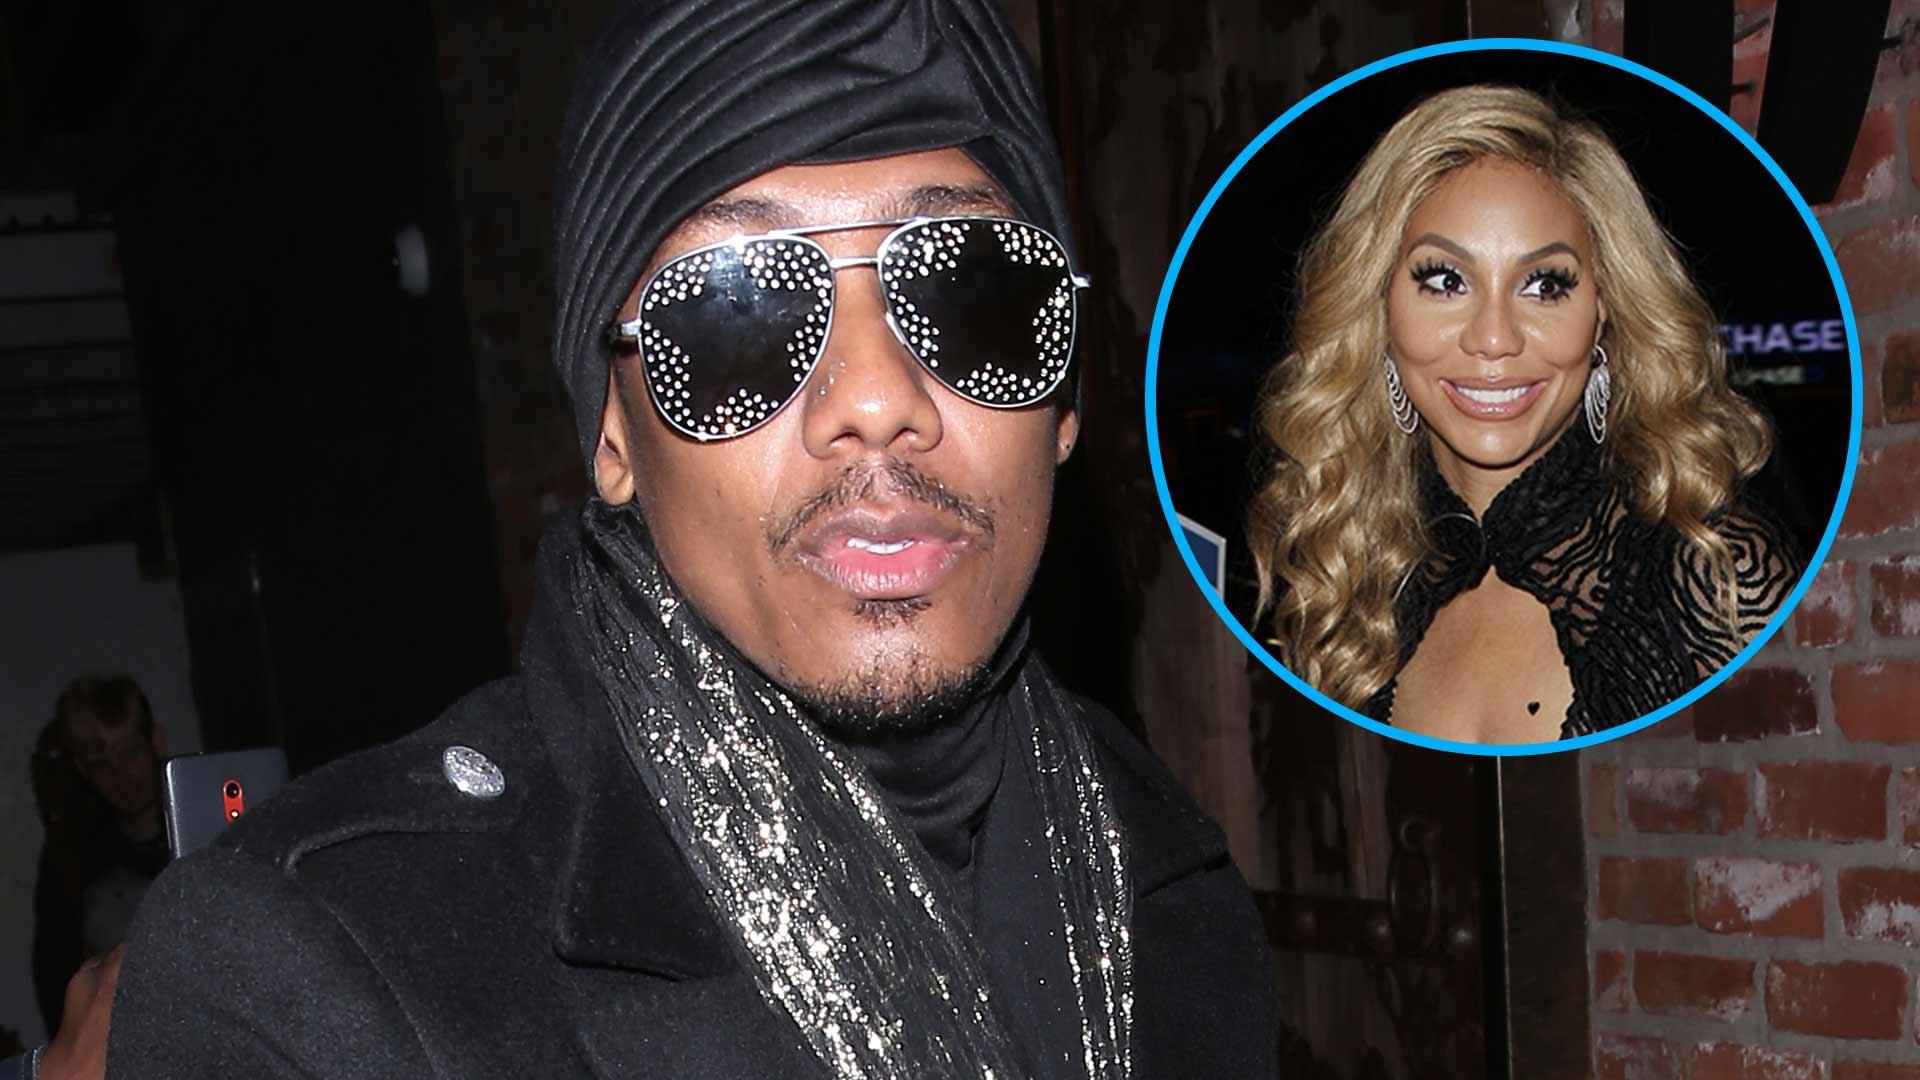 Nick Cannon’s Fans Pray For His Wellbeing After Tamar Braxton’s Possible Suicide Attempt